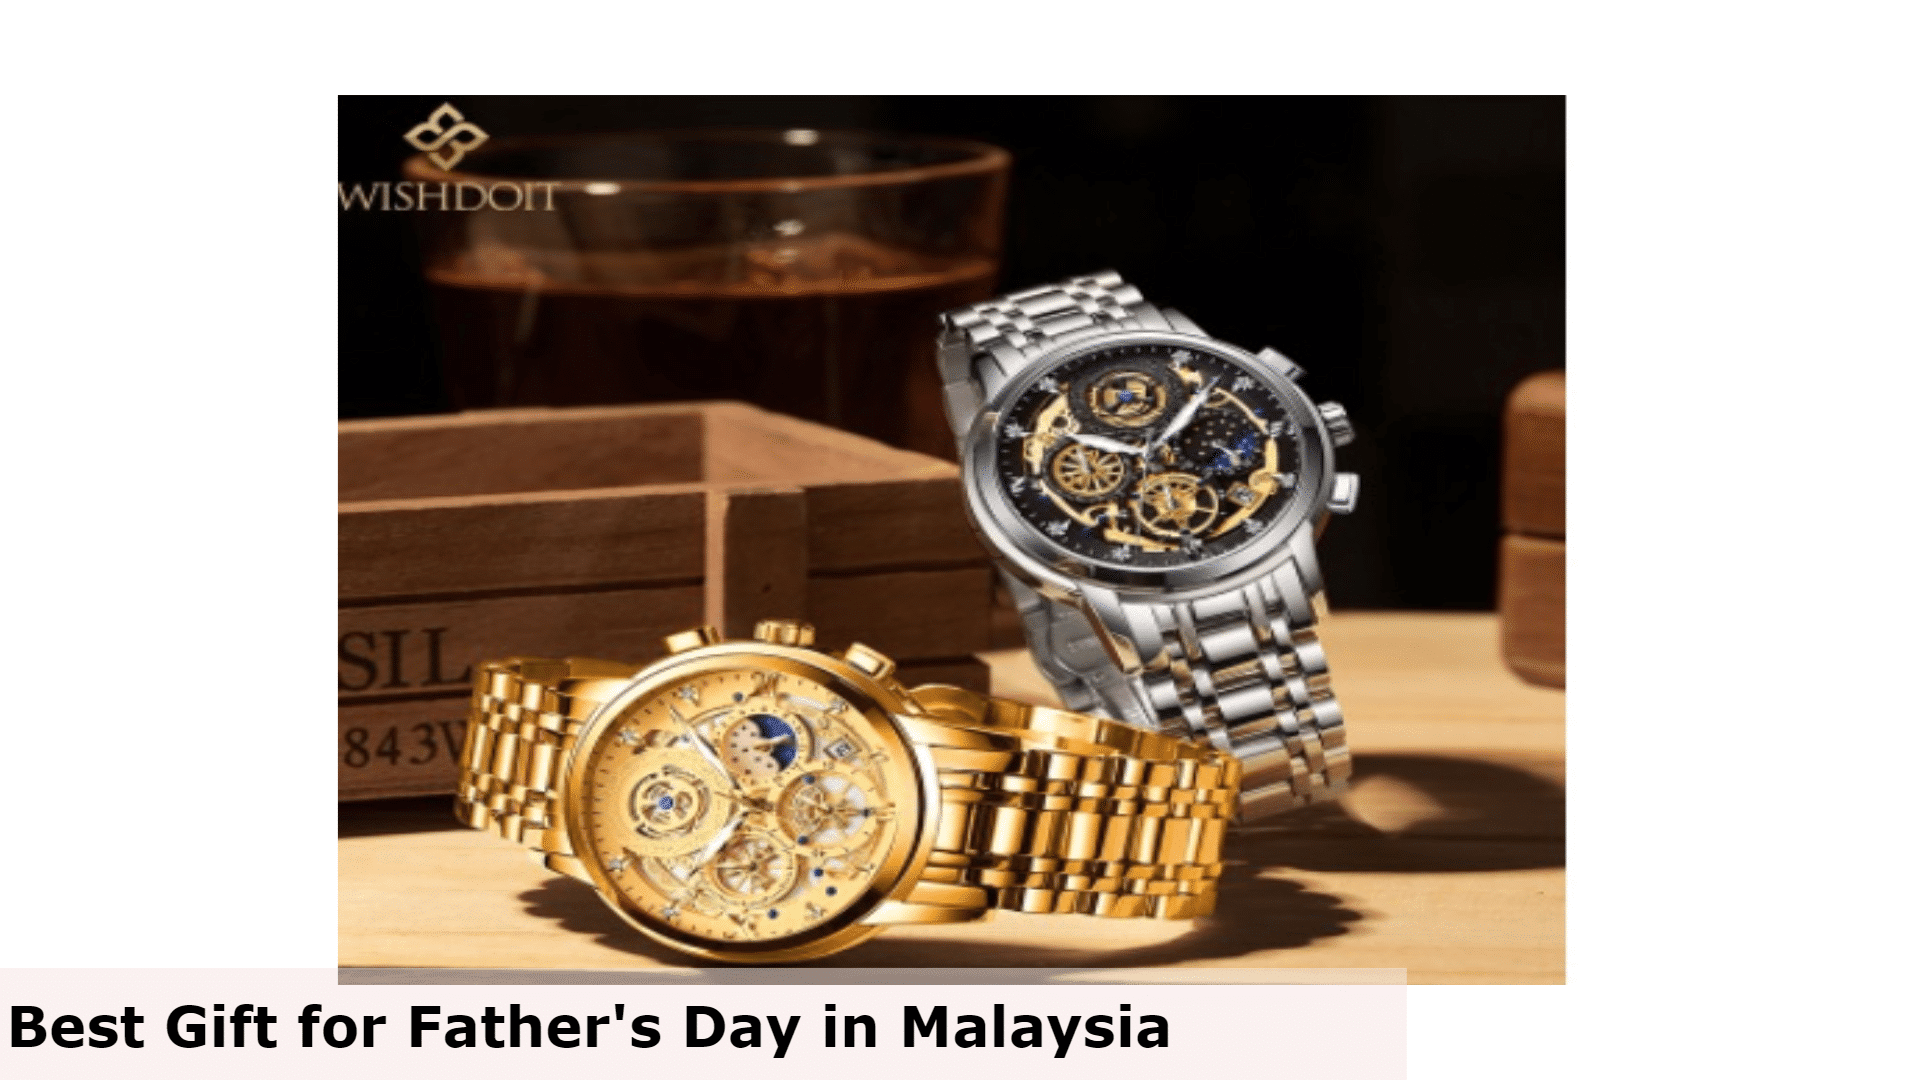 Men Watch - Best Gift for Father's Day in Malaysia, Best gift for Father's Day Malaysia, Best Father's Day Gifts for Dad, What do dads want for Father's Day in Malaysia?, What is a good cheap gift for Father's Day in Malaysia?, Do you give gifts on Father's Day in Malaysia?, gifts for dad who wants nothing, simple father's day gift ideas, father's day gift ideas 2022, father's day gift ideas during covid, father's day gift ideas from daughter, unique gifts for dad, father's day gift ideas from wife, fathers day gifts from son, What buy for a dad that doesn't want anything?, What to get a dad that is hard to buy for?, What should I get my boring dad for Christmas?, What gifts do dads like?,